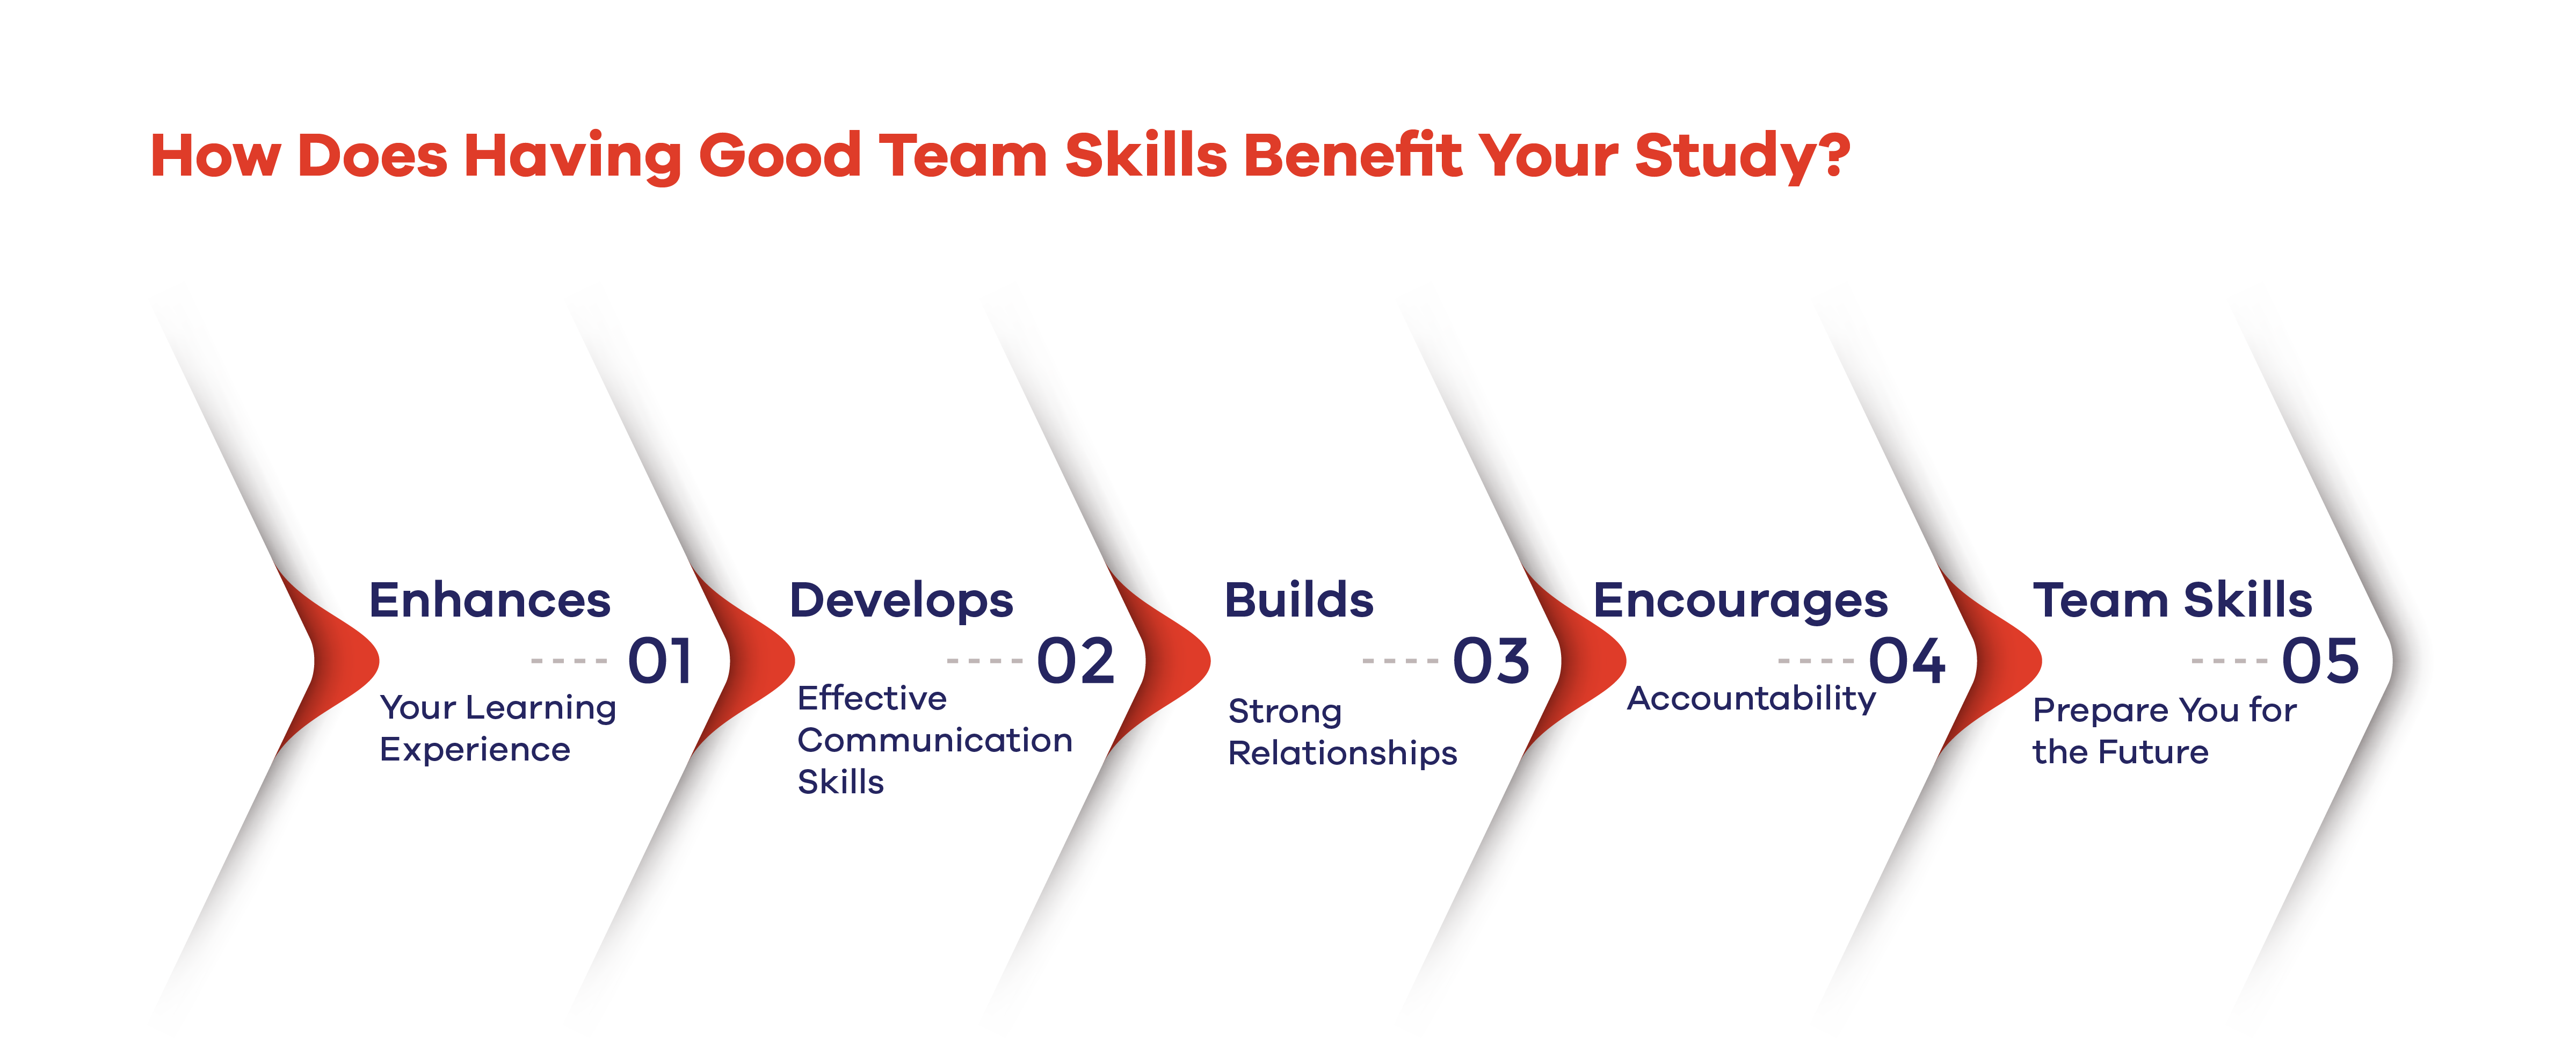 How Does Having Good Team Skills Benefit Your Study? 